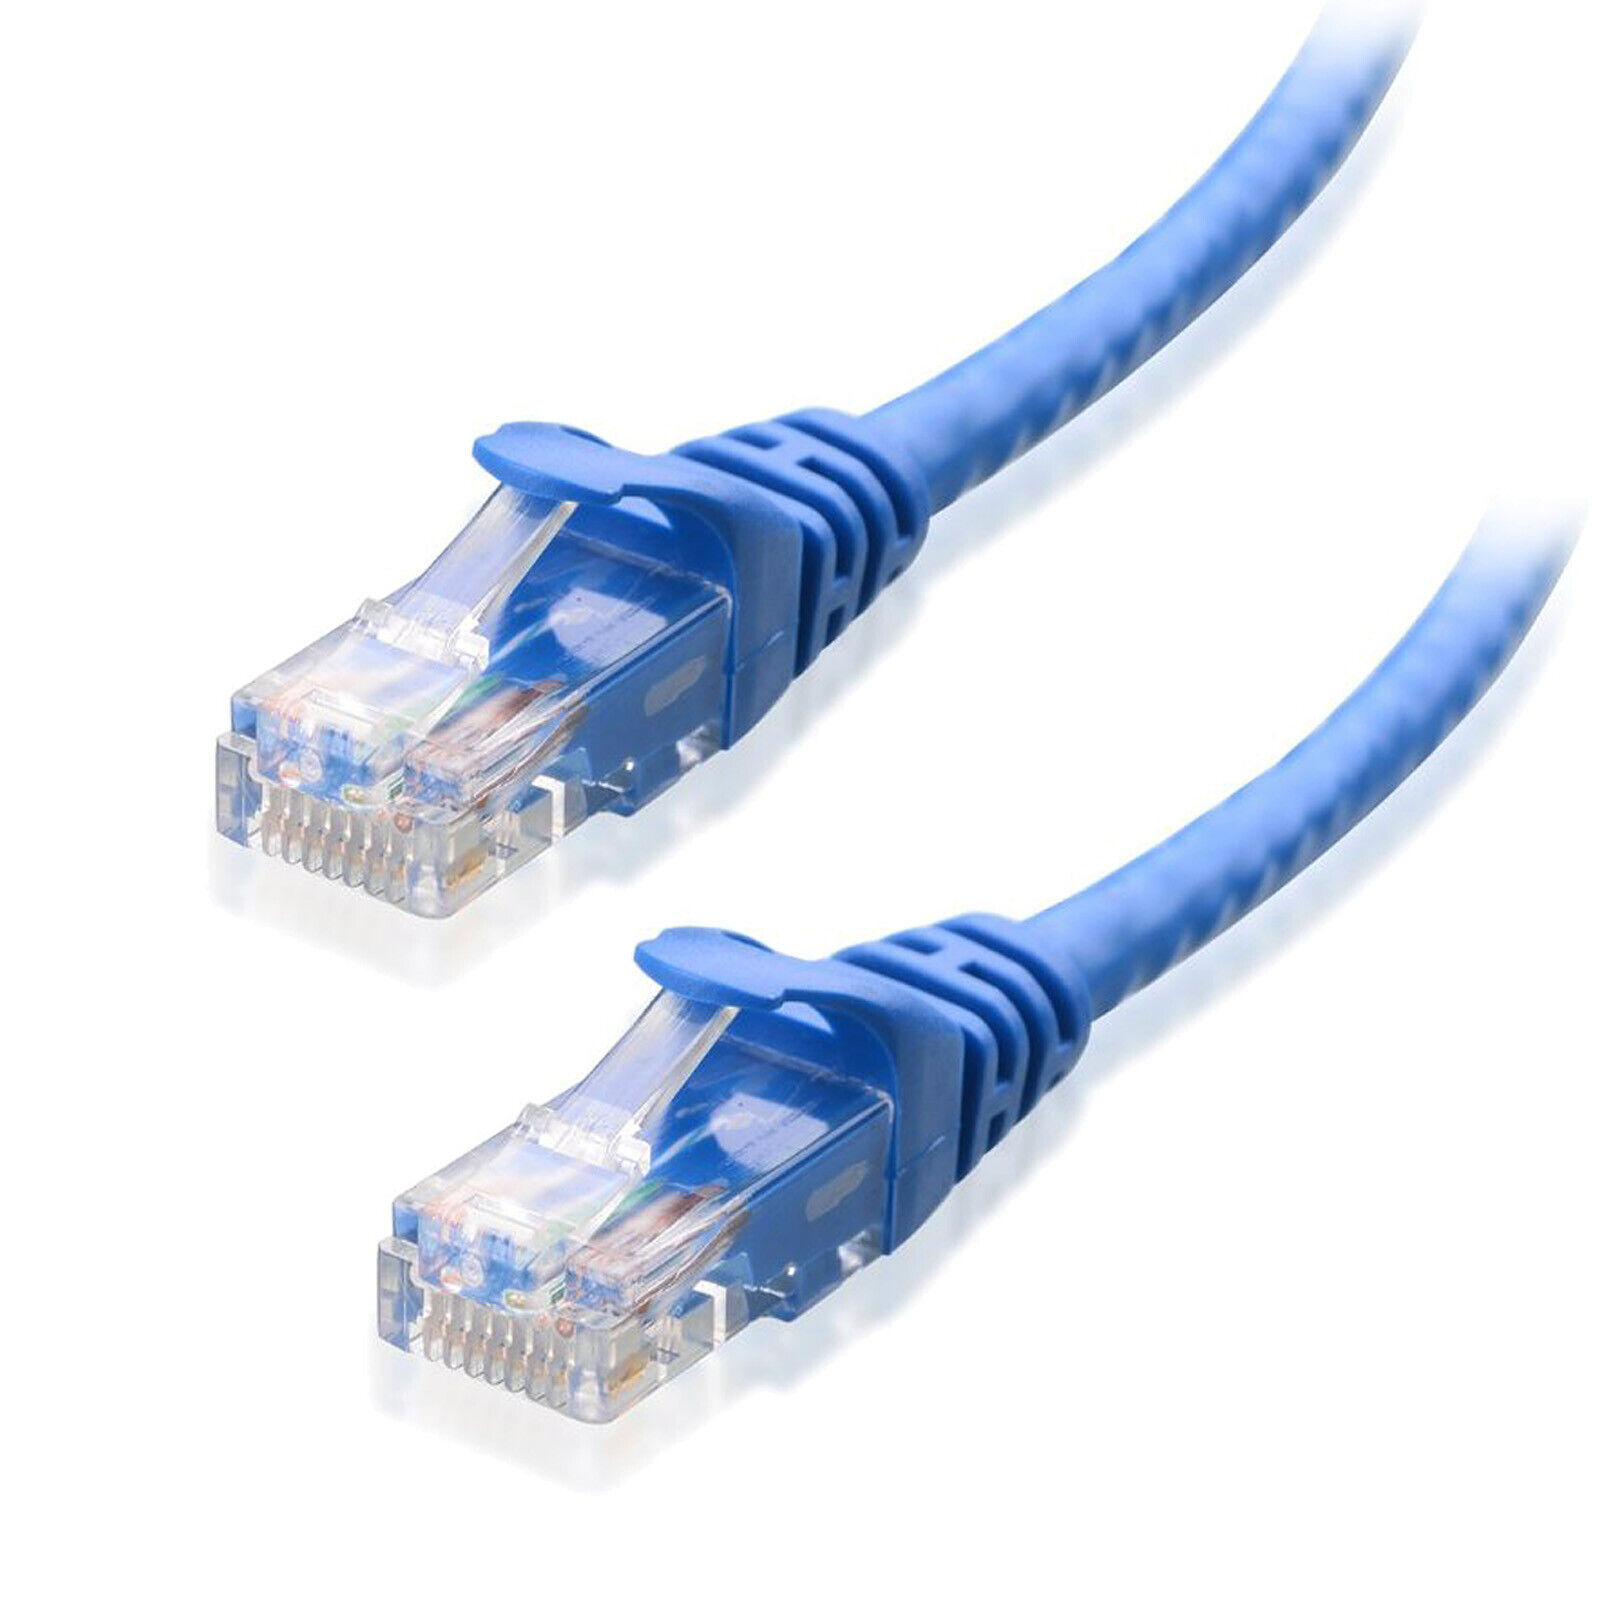 Long/Short RJ45 Cat6 Cat5e Ethernet Lan Patch Cable - from 6Ft to 100Ft Lot